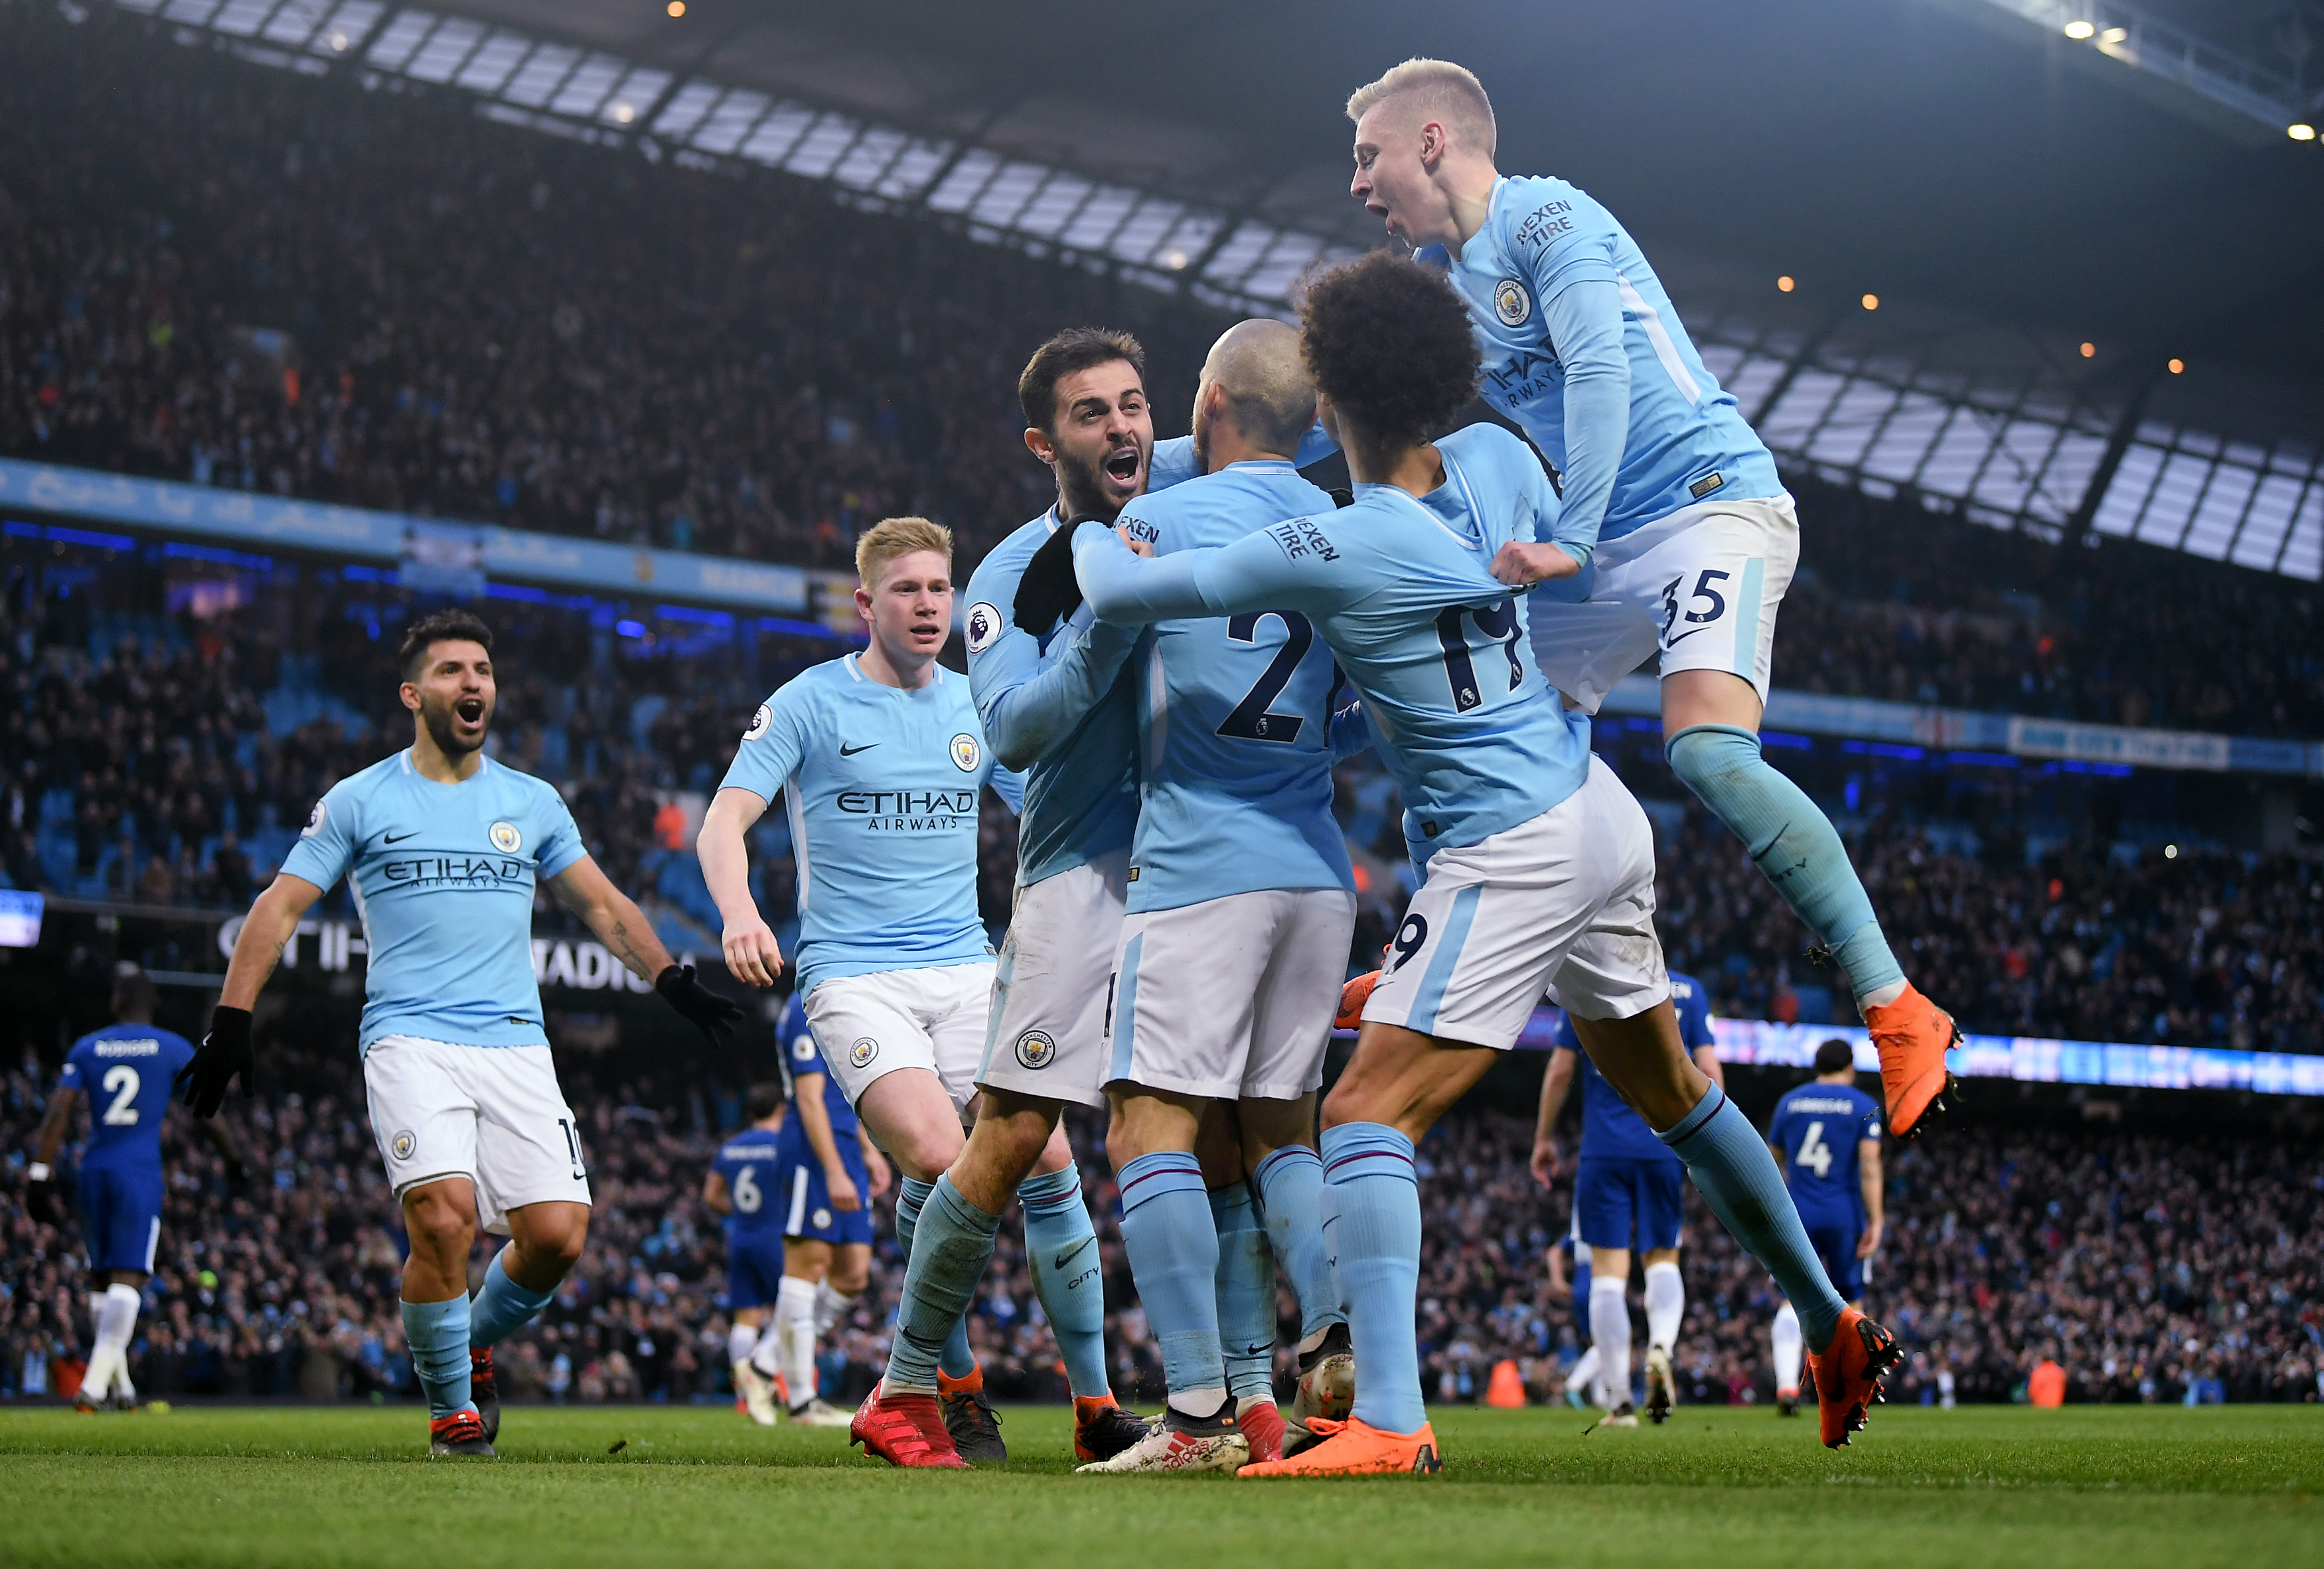 MANCHESTER, ENGLAND - MARCH 04:  Bernardo Silva of Manchester City is congratulated after scoring the opening goal during the Premier League match between Manchester City and Chelsea at Etihad Stadium on March 4, 2018 in Manchester, England.  (Photo by Laurence Griffiths/Getty Images)